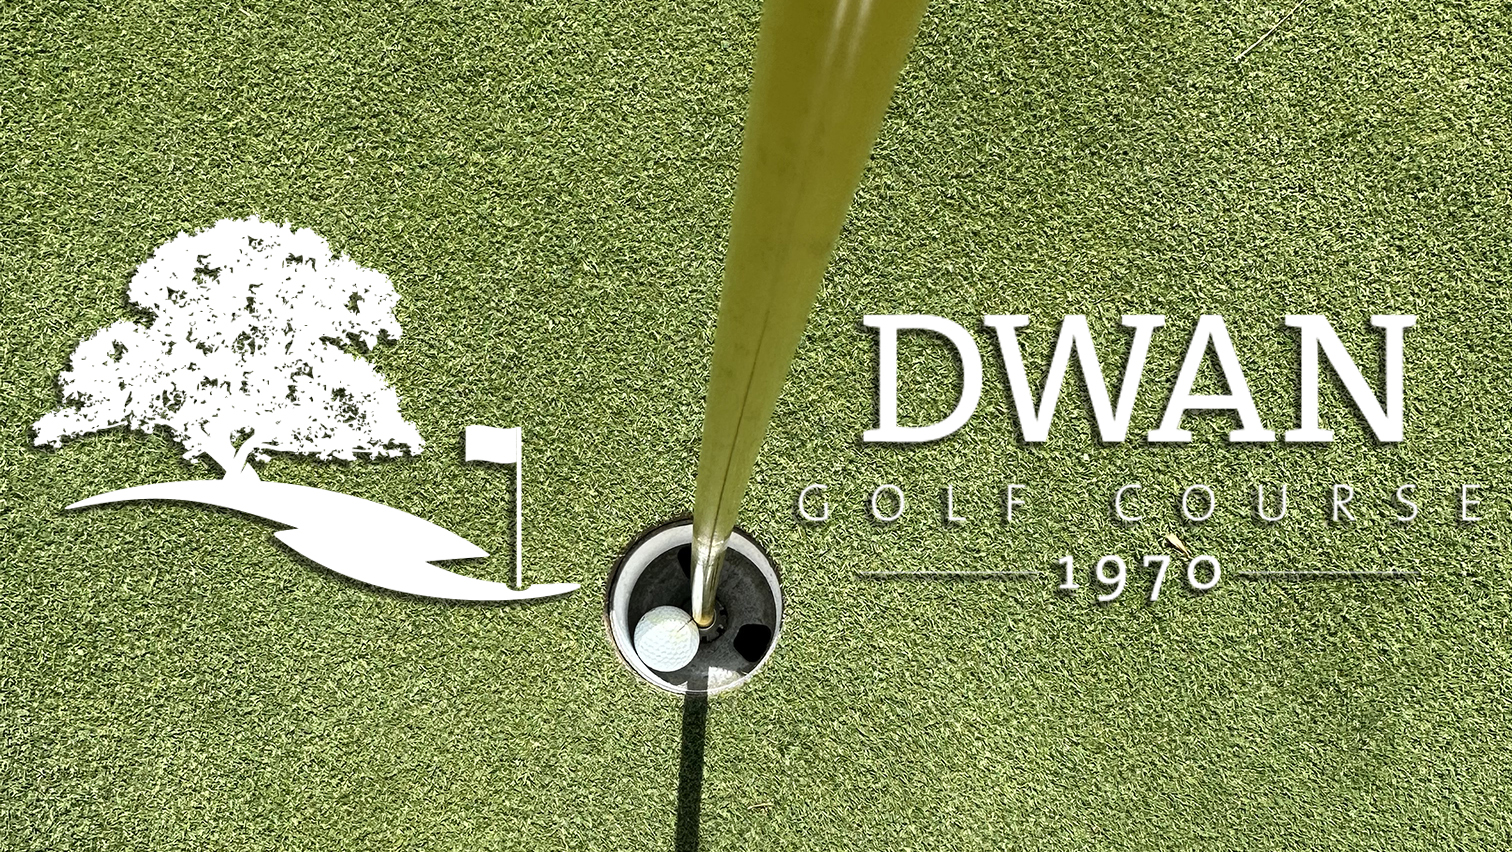 Dwan generic hole in one graphic